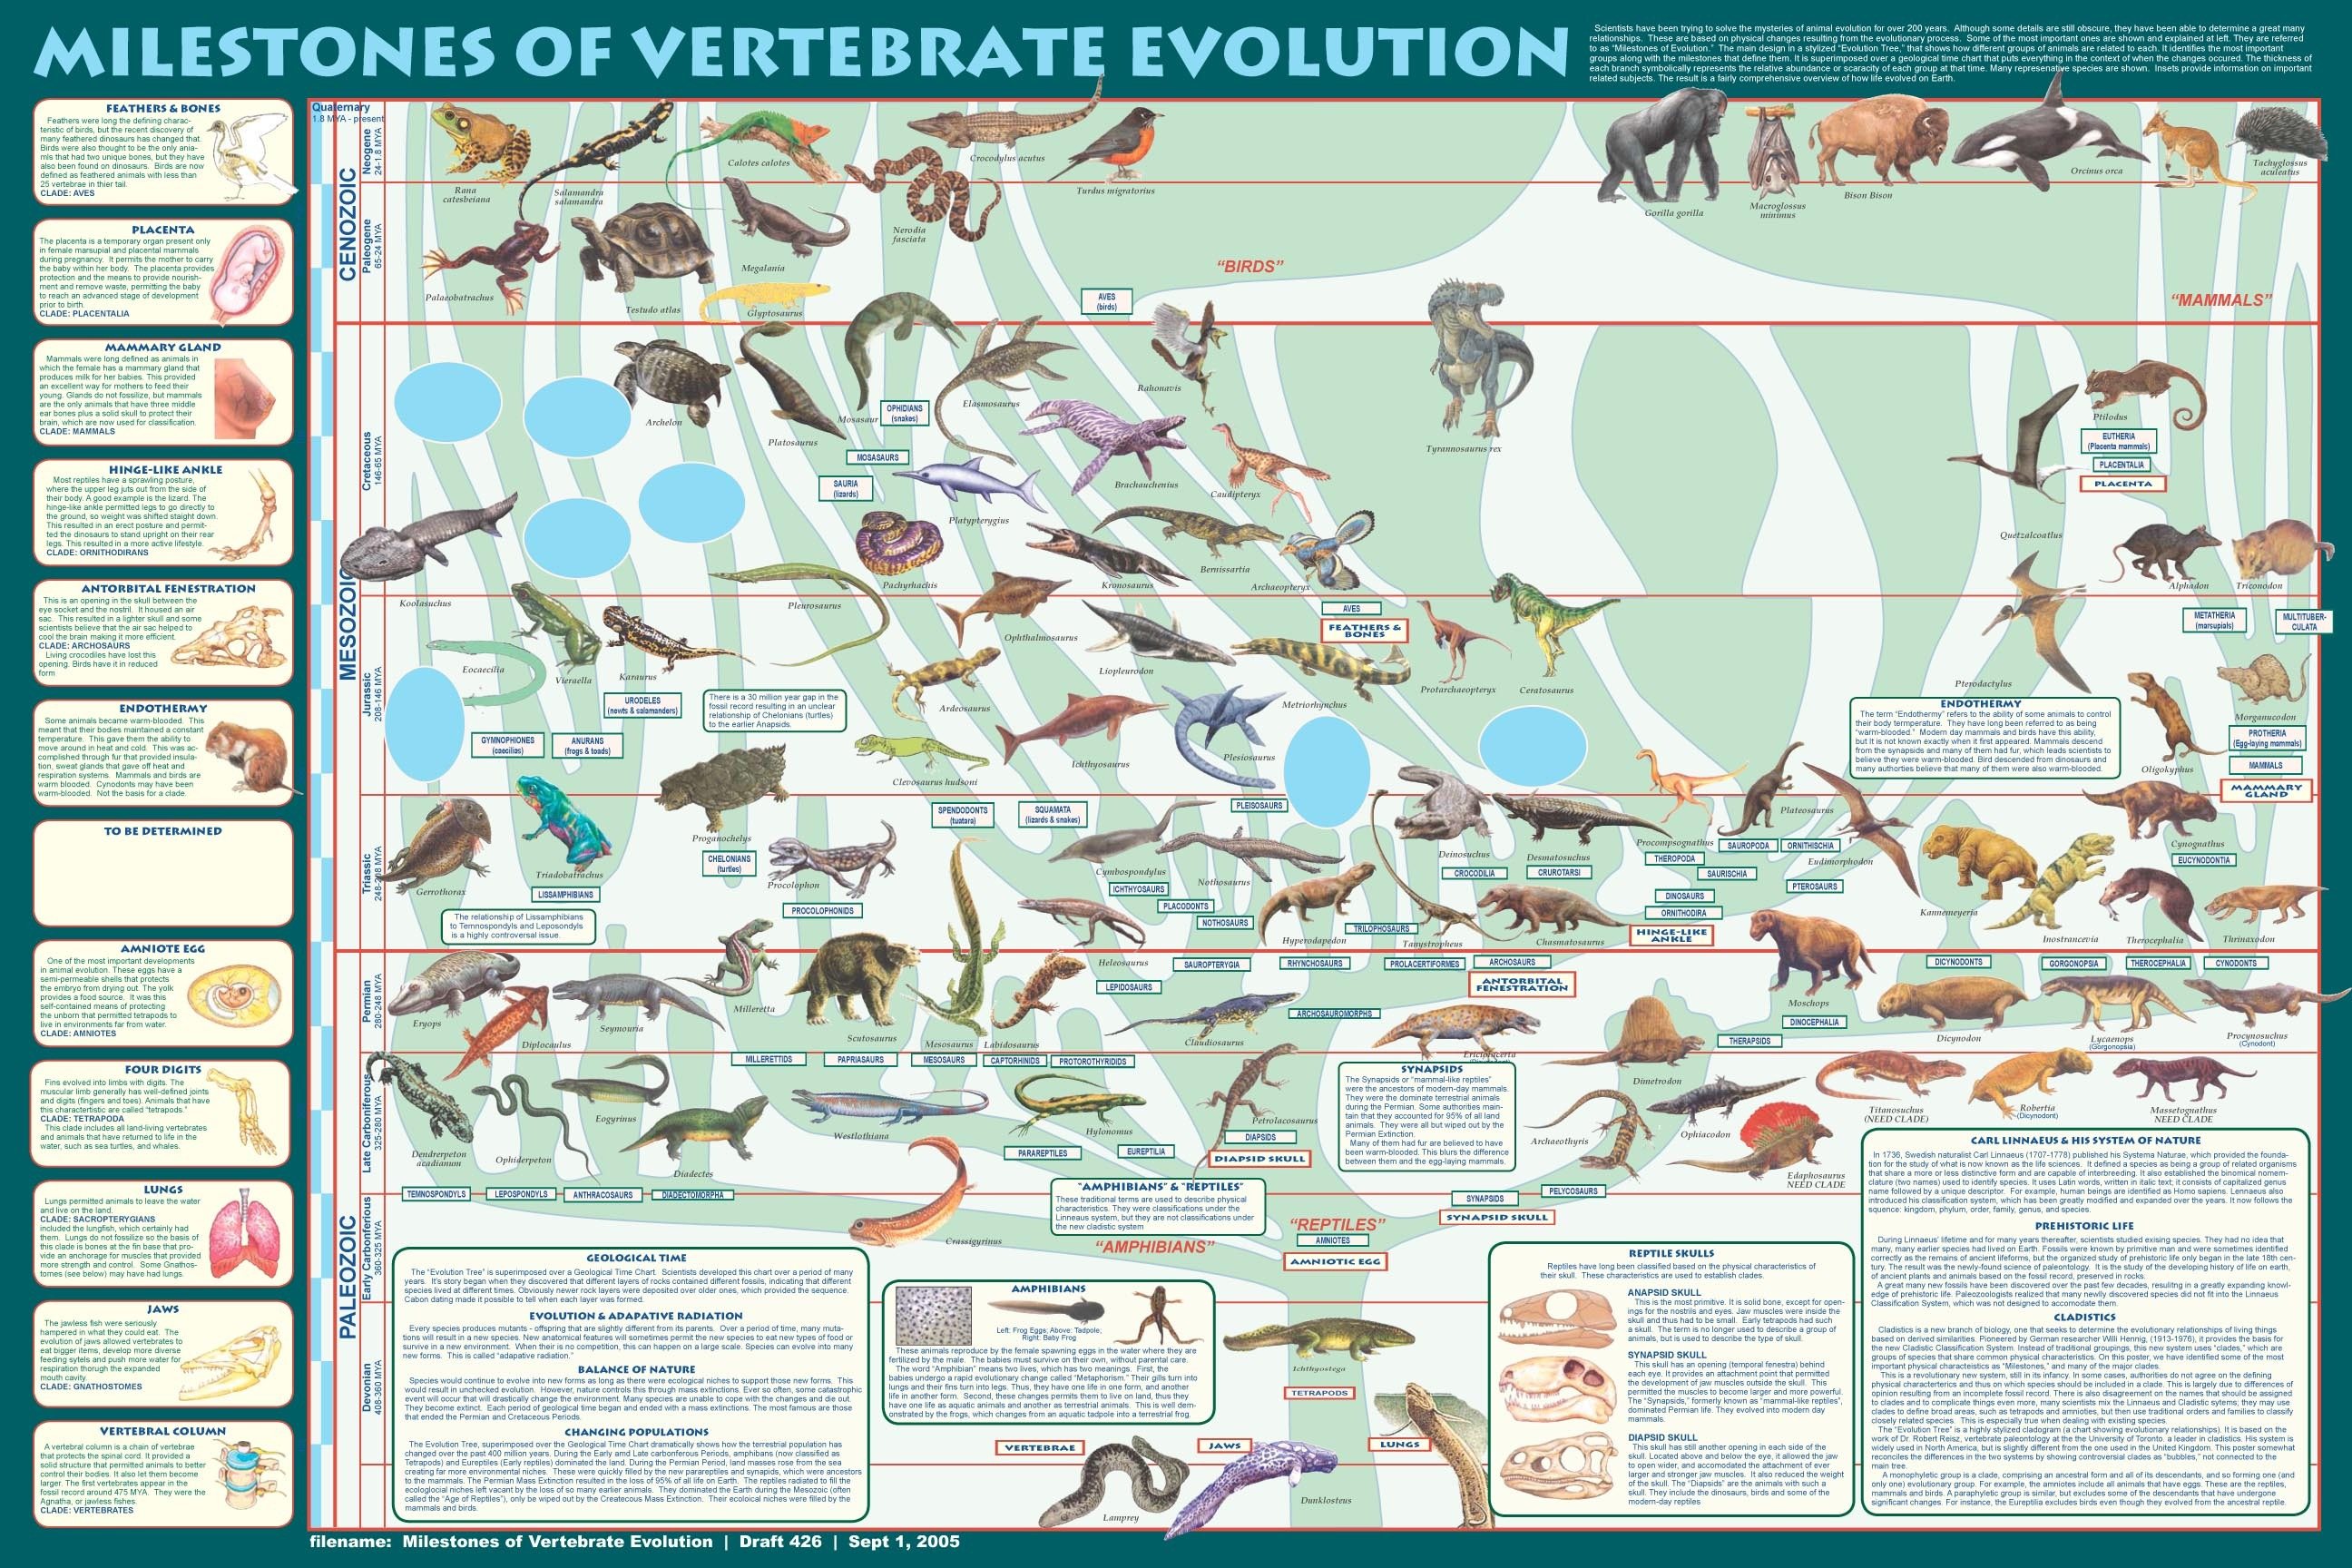 Ever wonder how the vertebrate evolution works? Try to look at this chart. It will help you understand a lot by just looking at its image.